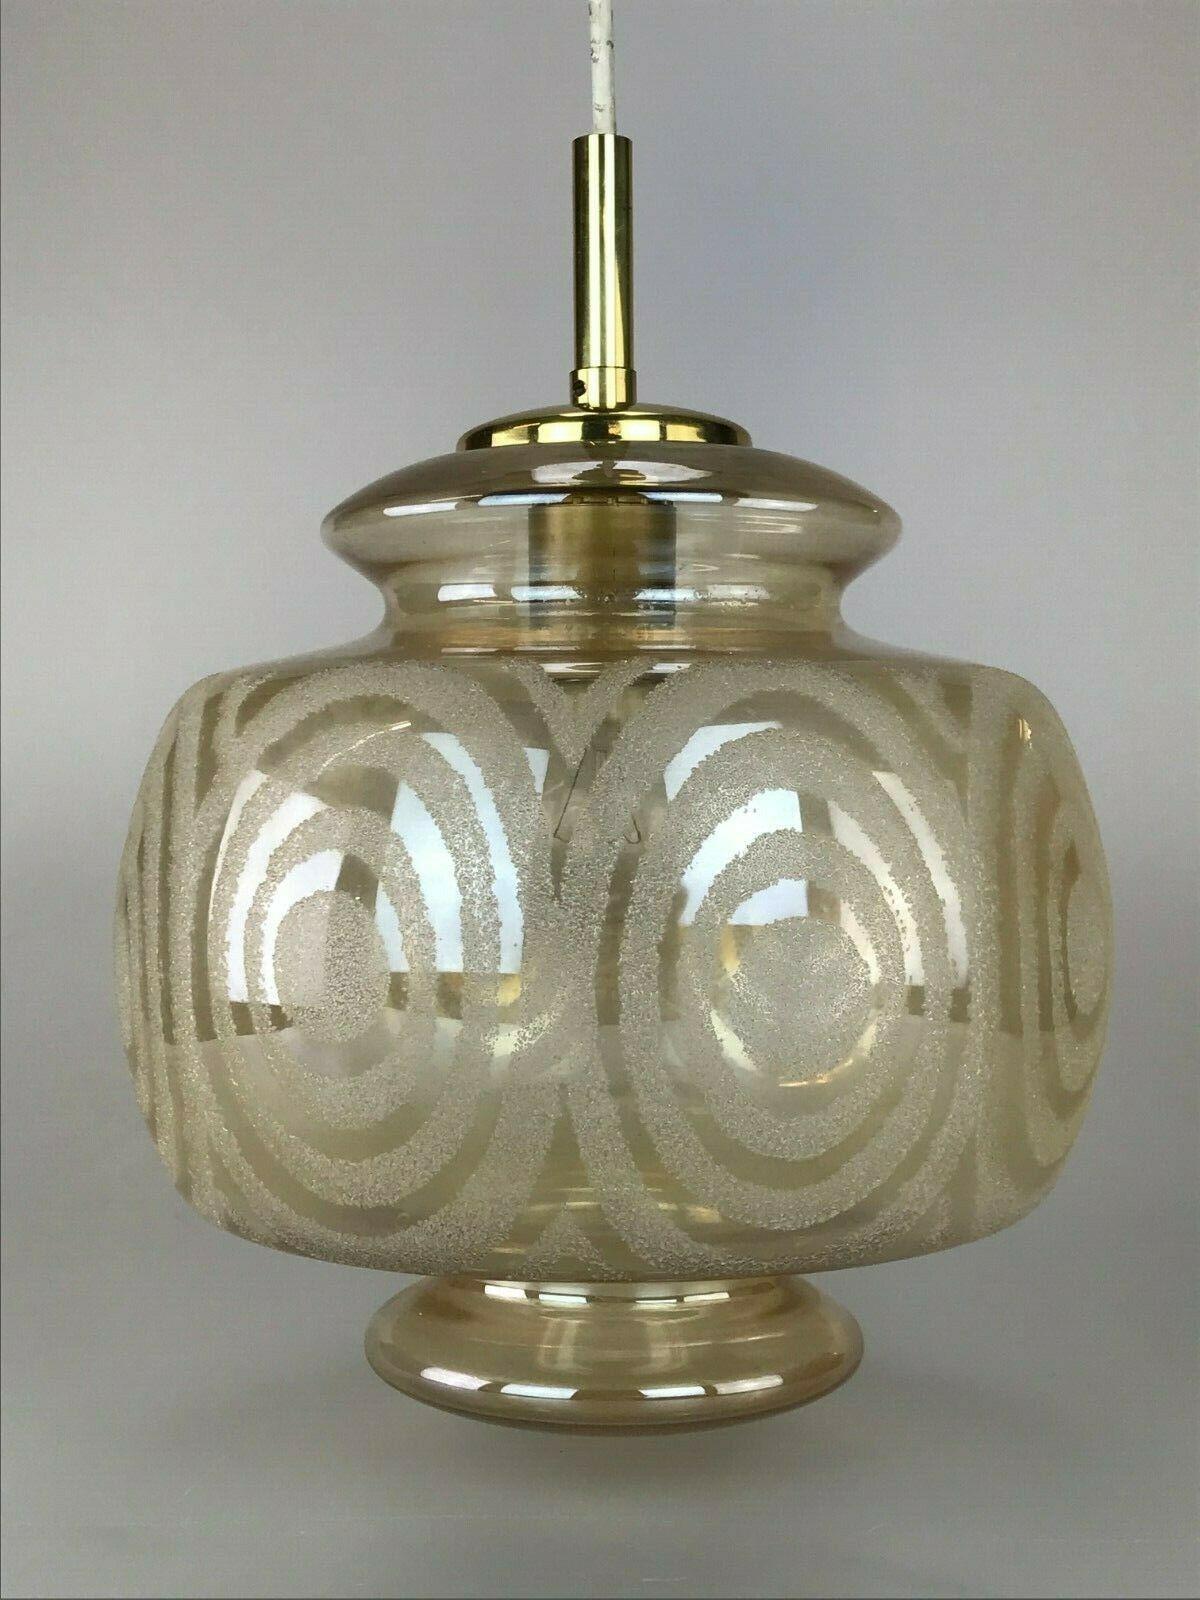 70s lamp hanging lamp ball lamp bubble brass glass space age design

Object: ceiling lamp

Manufacturer:

Condition: good

Age: around 1960-1970

Dimensions:

Diameter = 25cm
Height = 34cm

Other notes:

The pictures serve as part